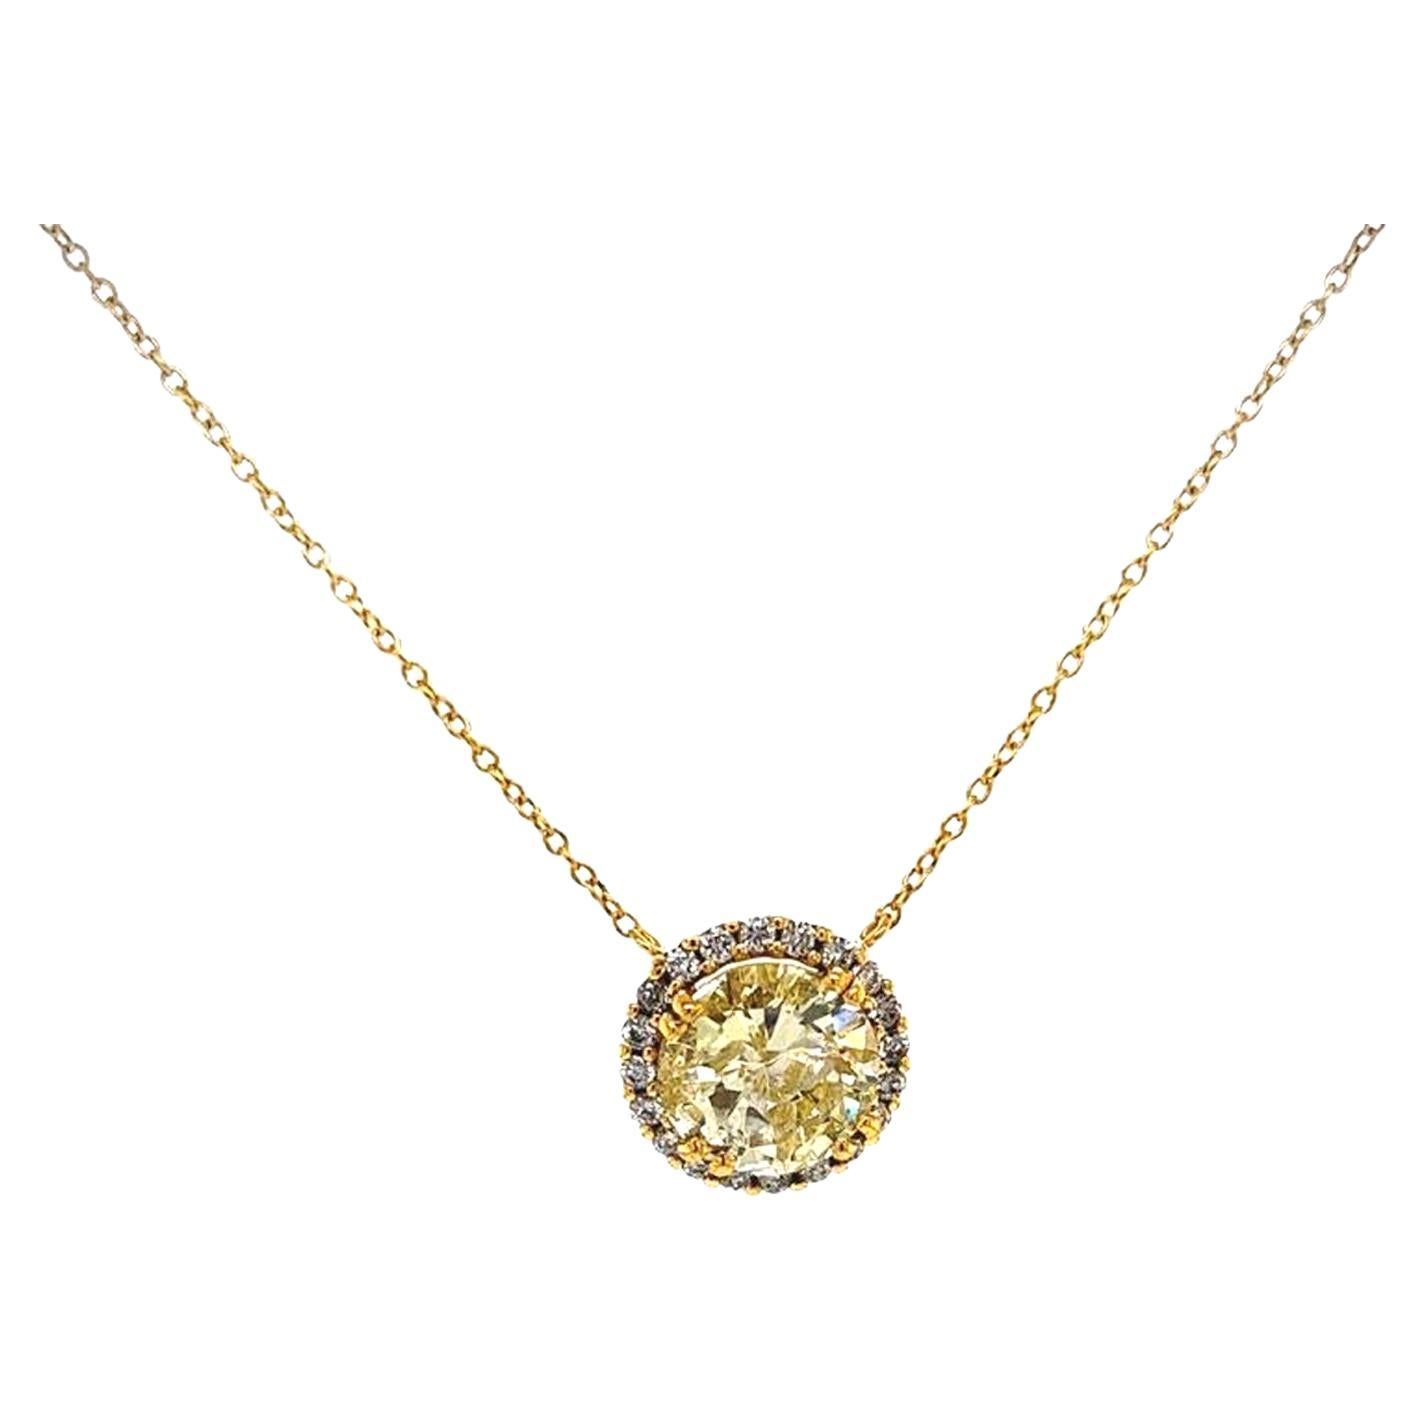 3.15 Carat Natural Fancy Yellow Round Diamond 18K Gold Pendant Halo Necklace For Sale